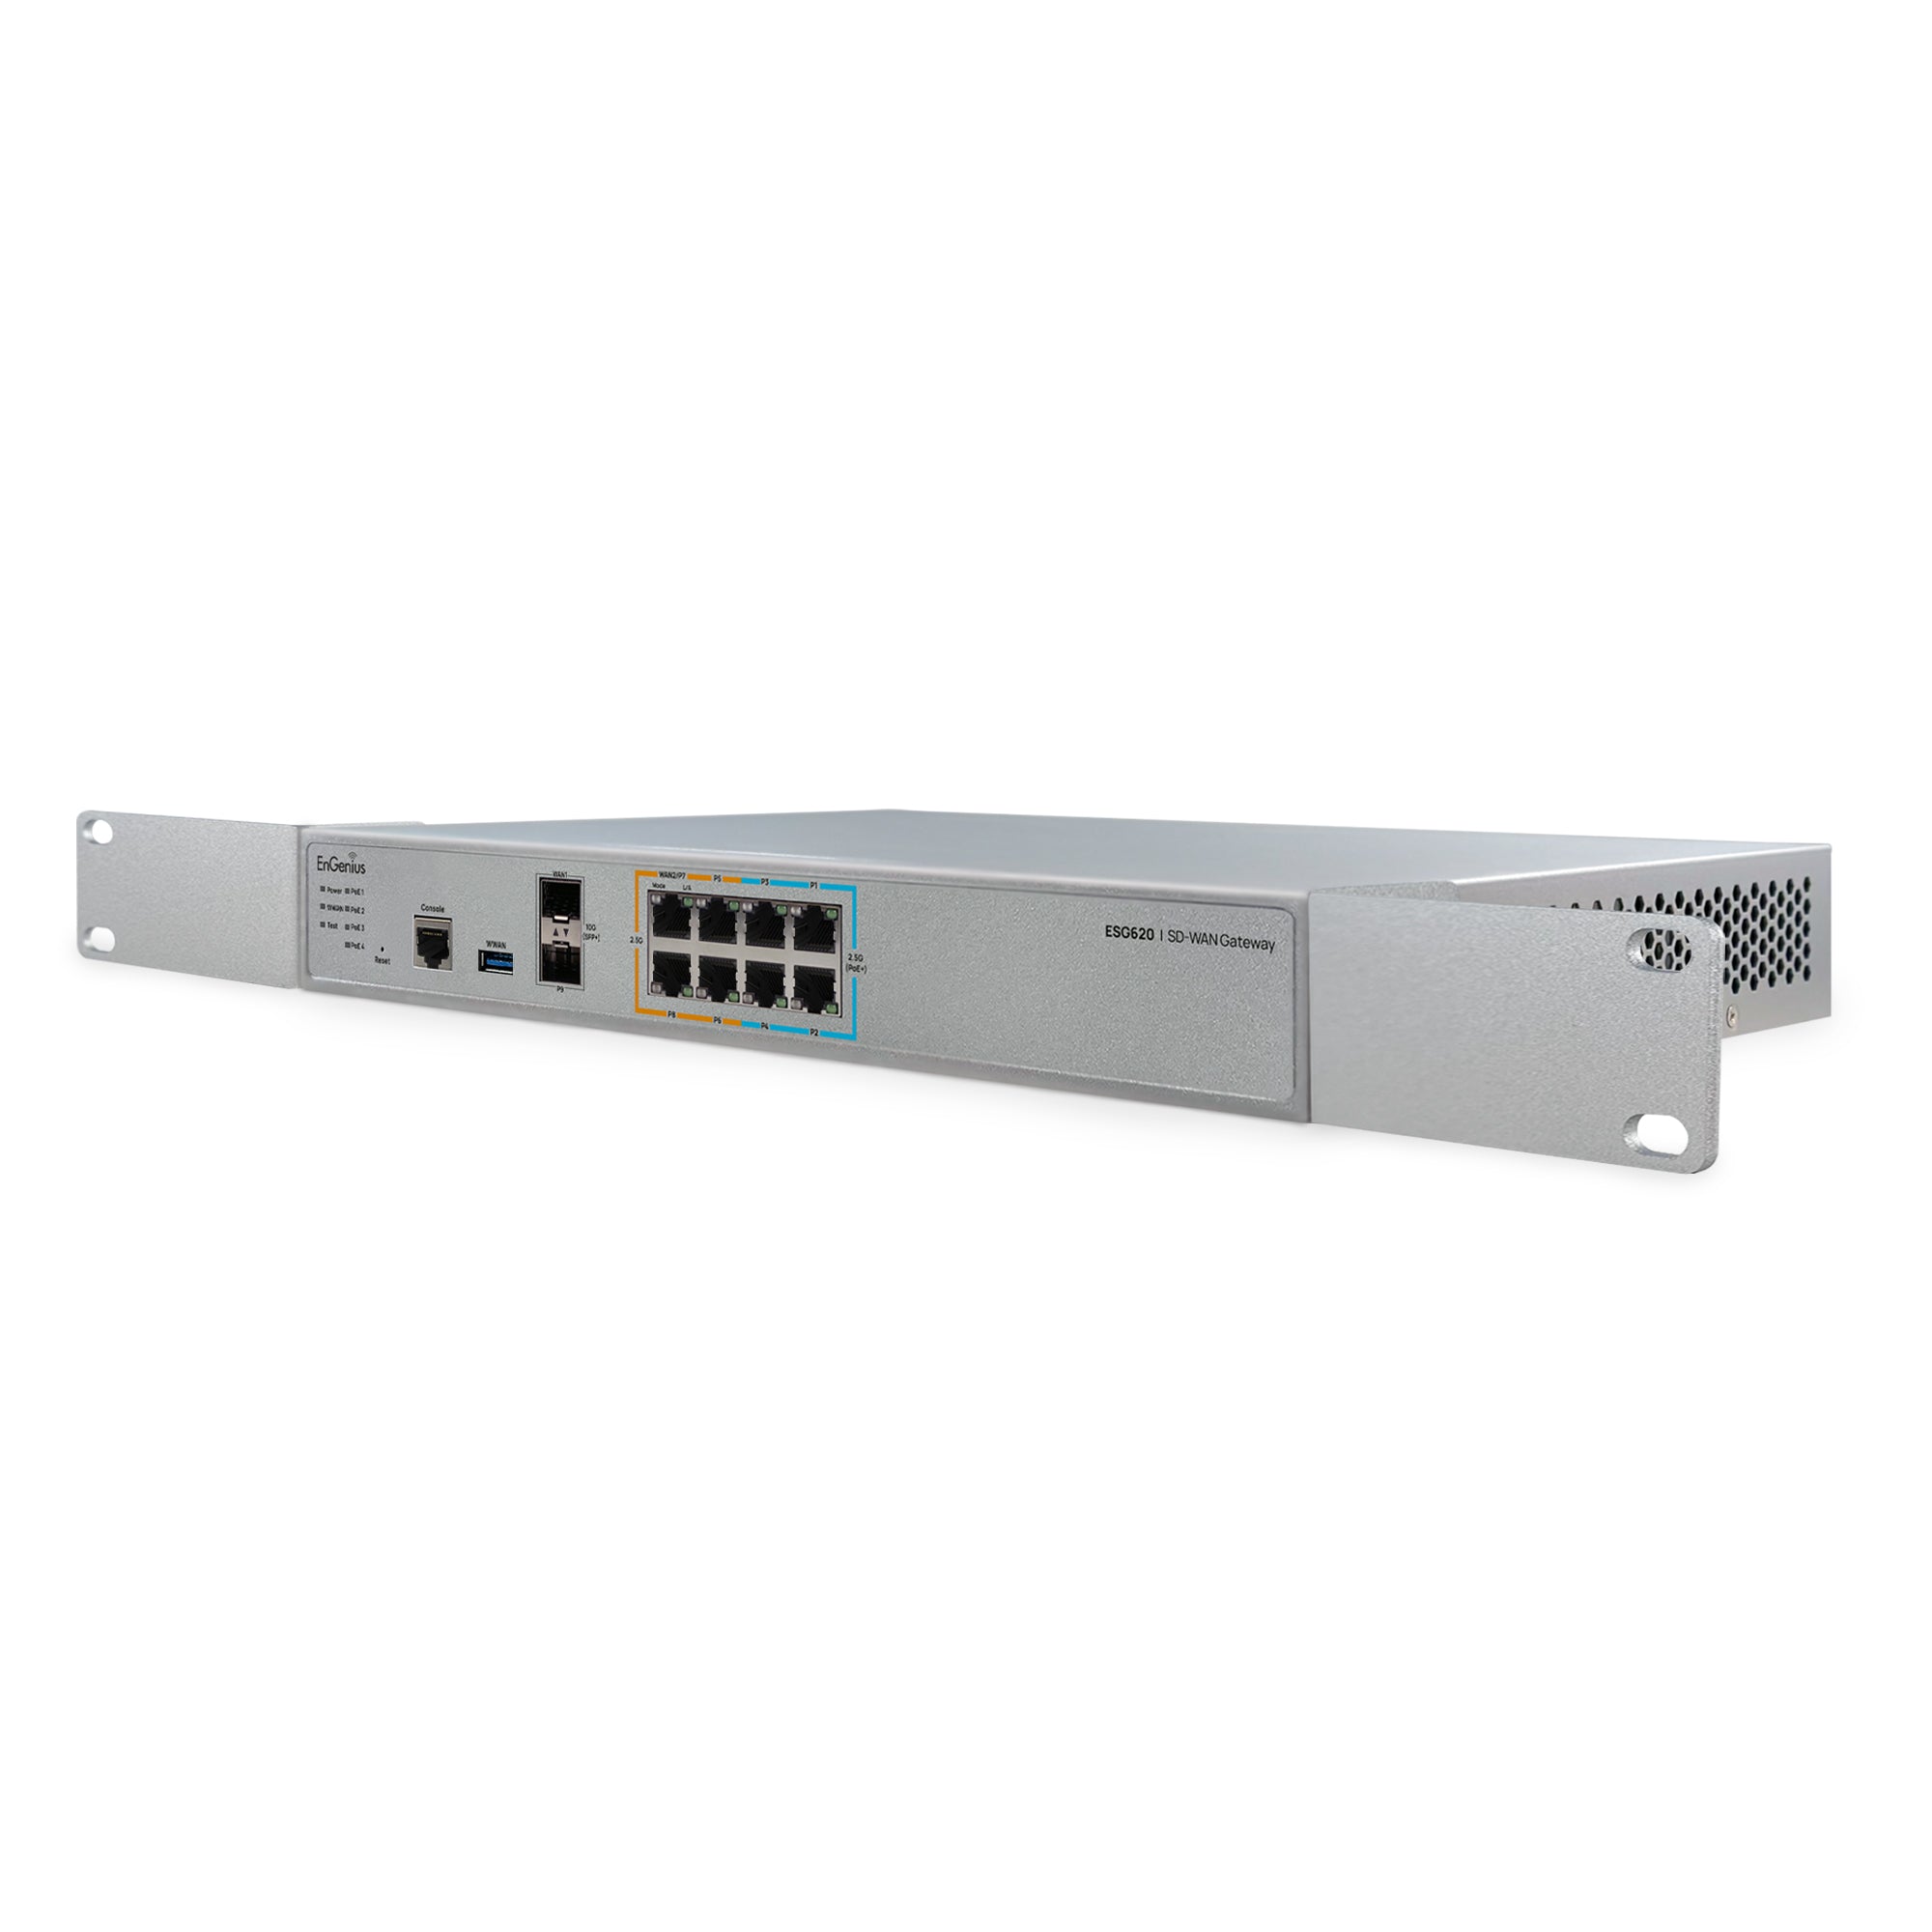 ESG620: Cloud Managed SD-WAN Security Gateway with Quad Core 2.2GHz and 8x 2.5G ports